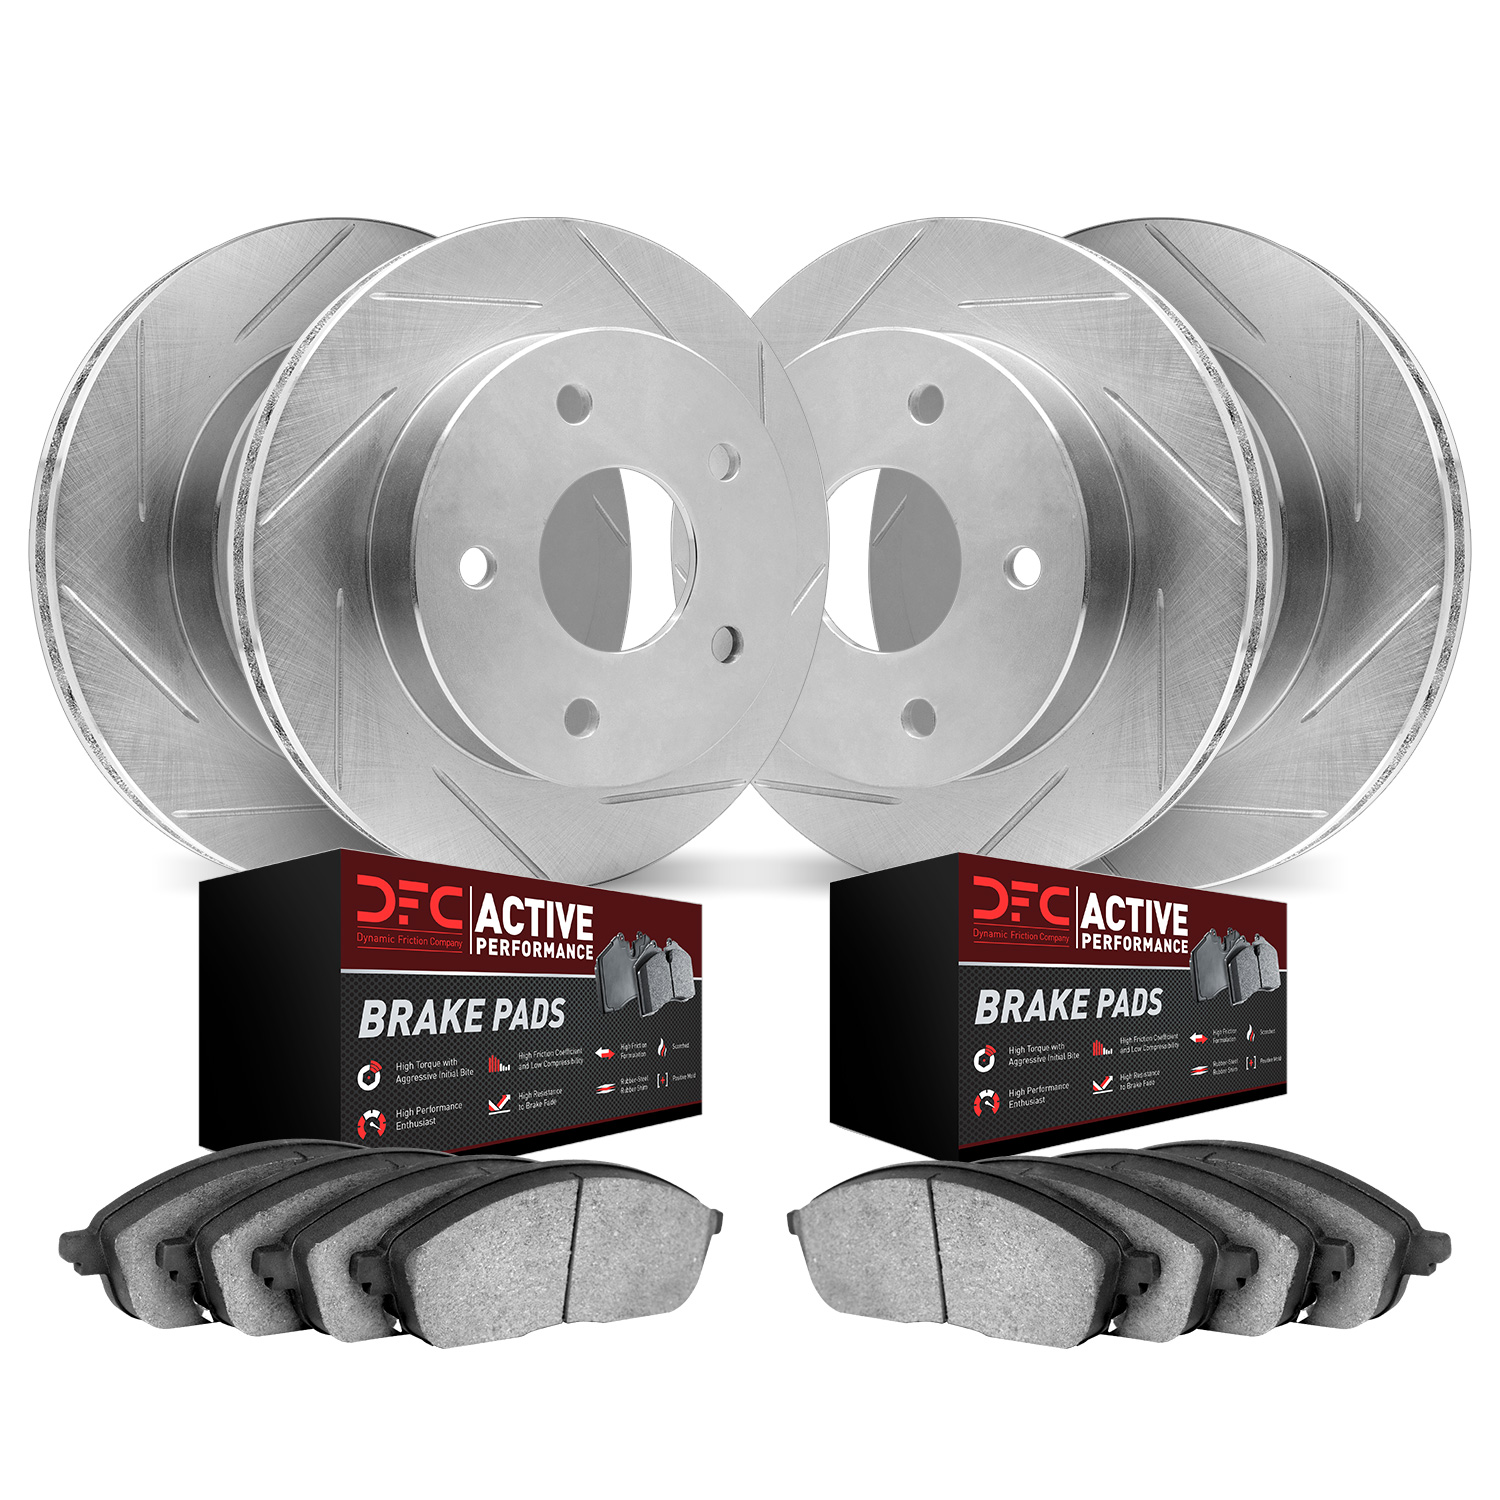 2704-75003 Geoperformance Slotted Brake Rotors with Active Performance Pads Kits, 2006-2013 Lexus/Toyota/Scion, Position: Front